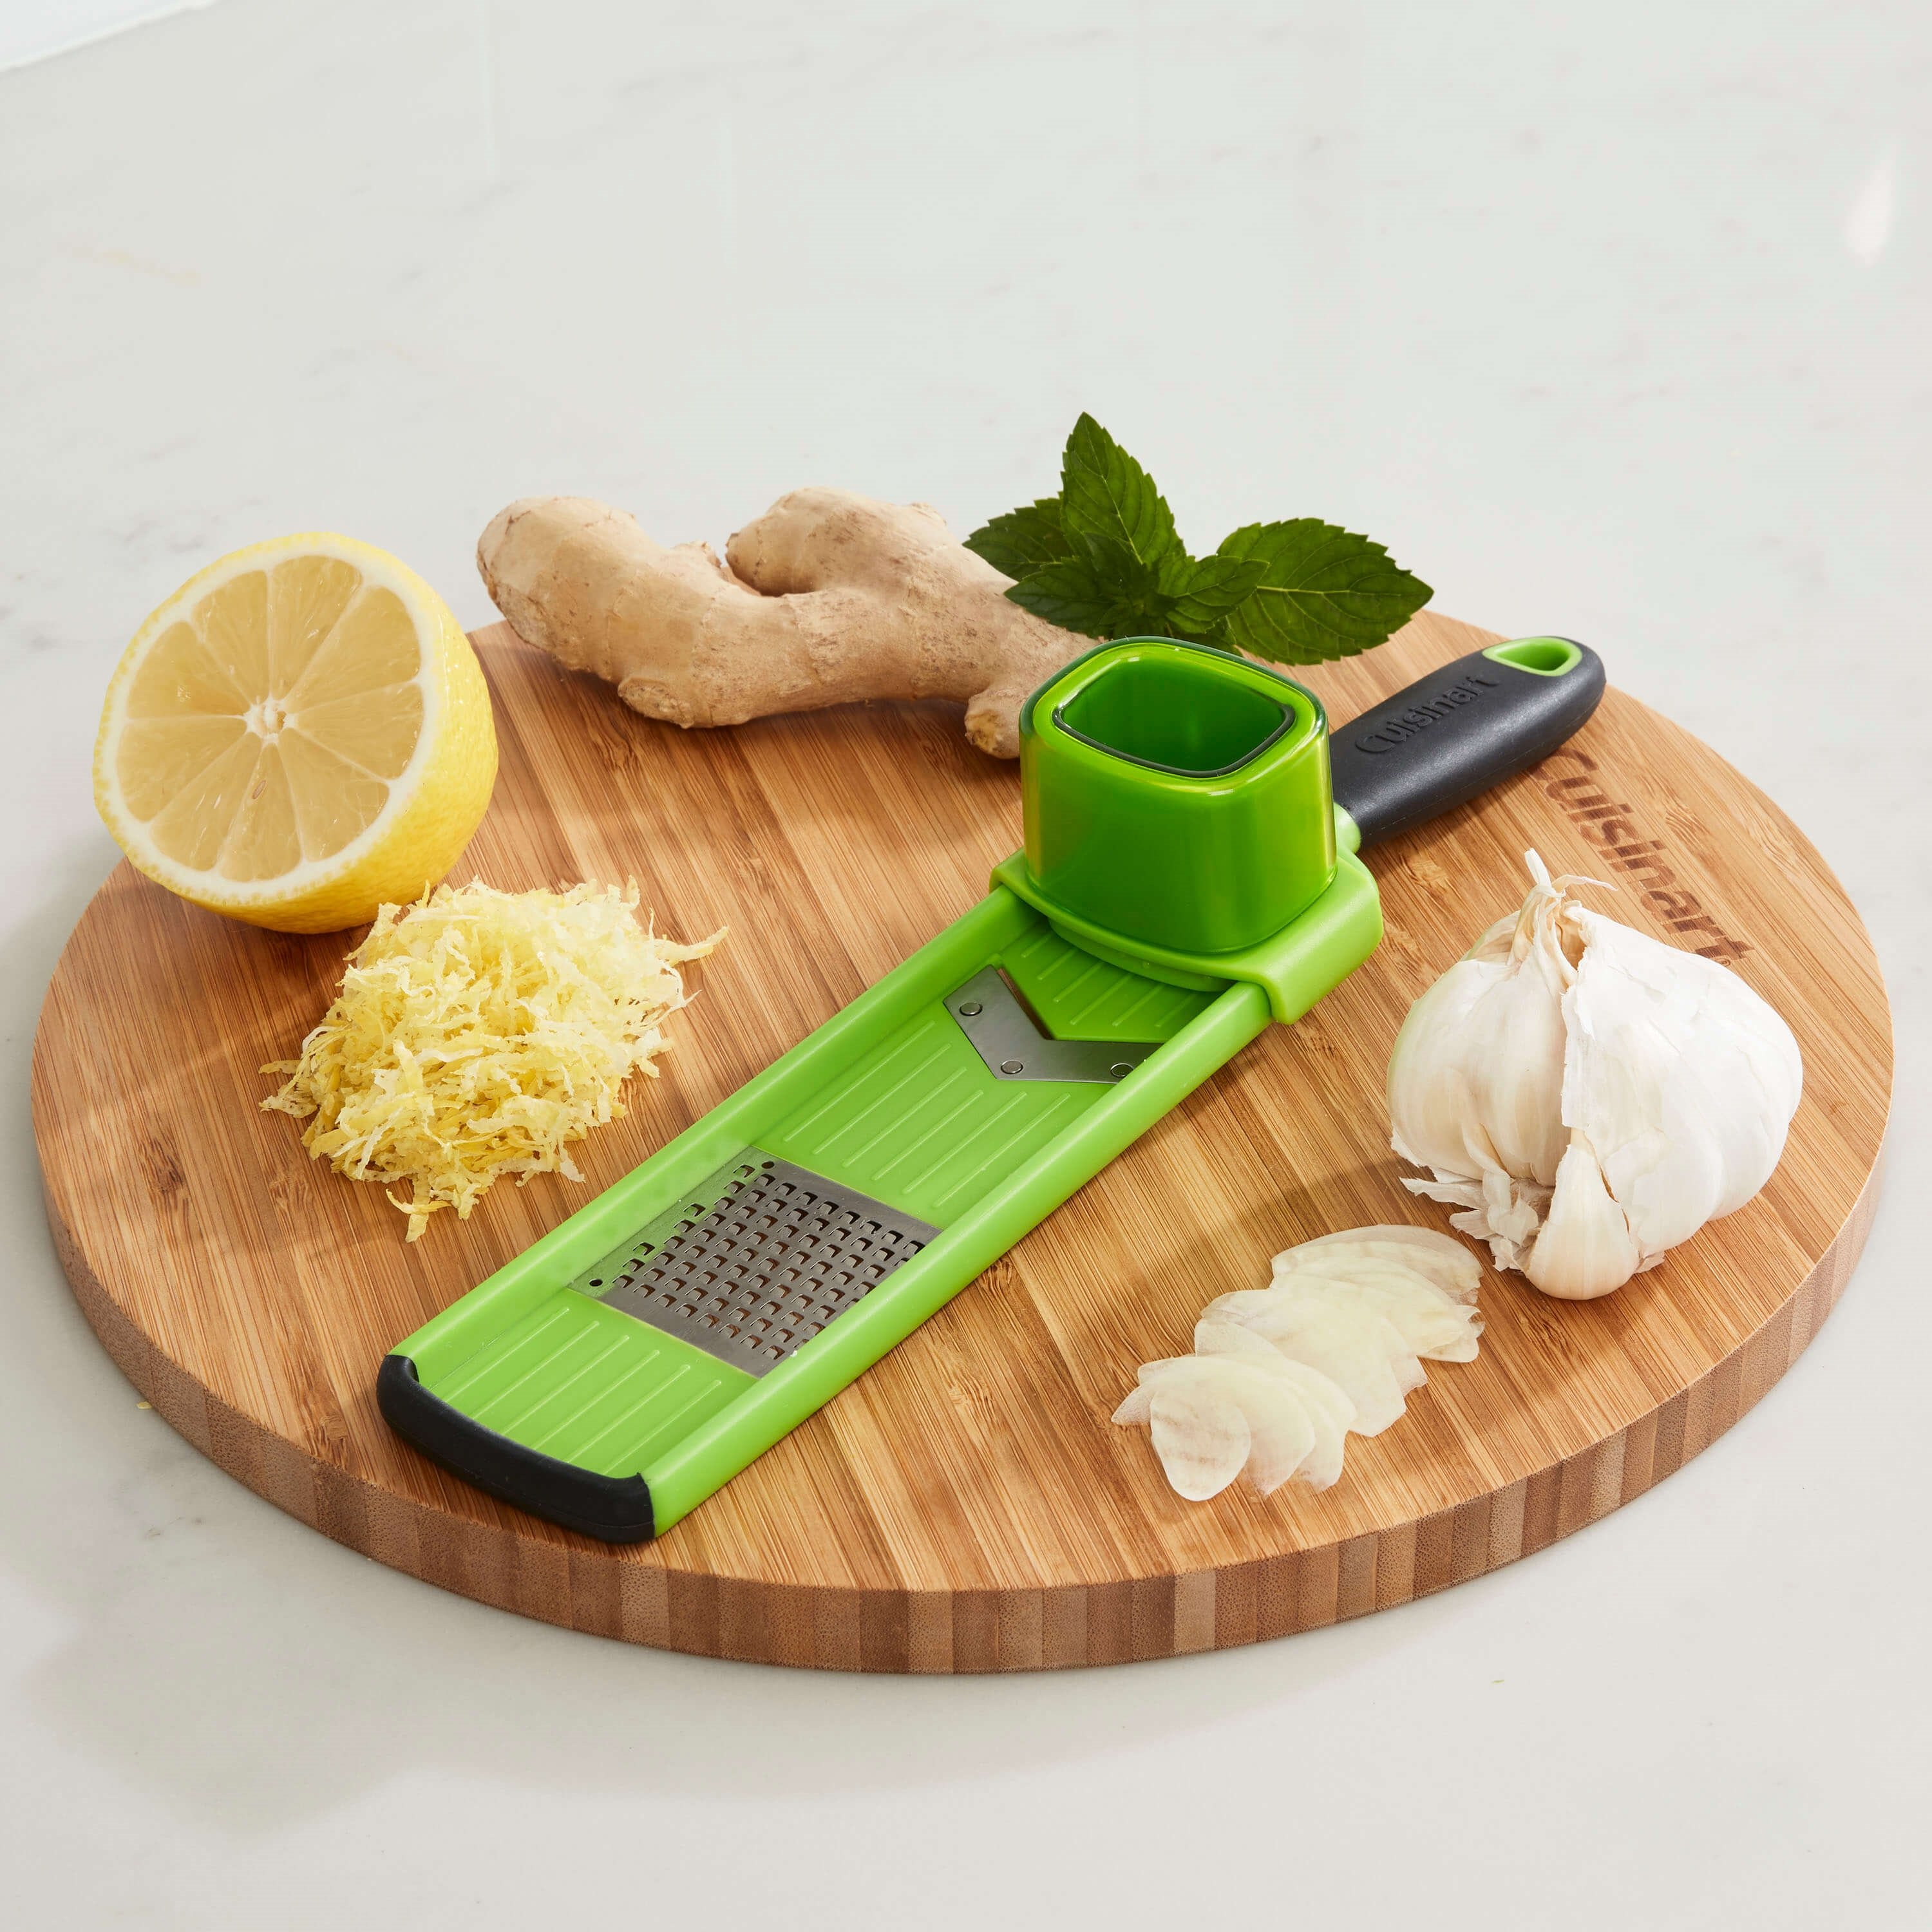 The Great Garlic Grater